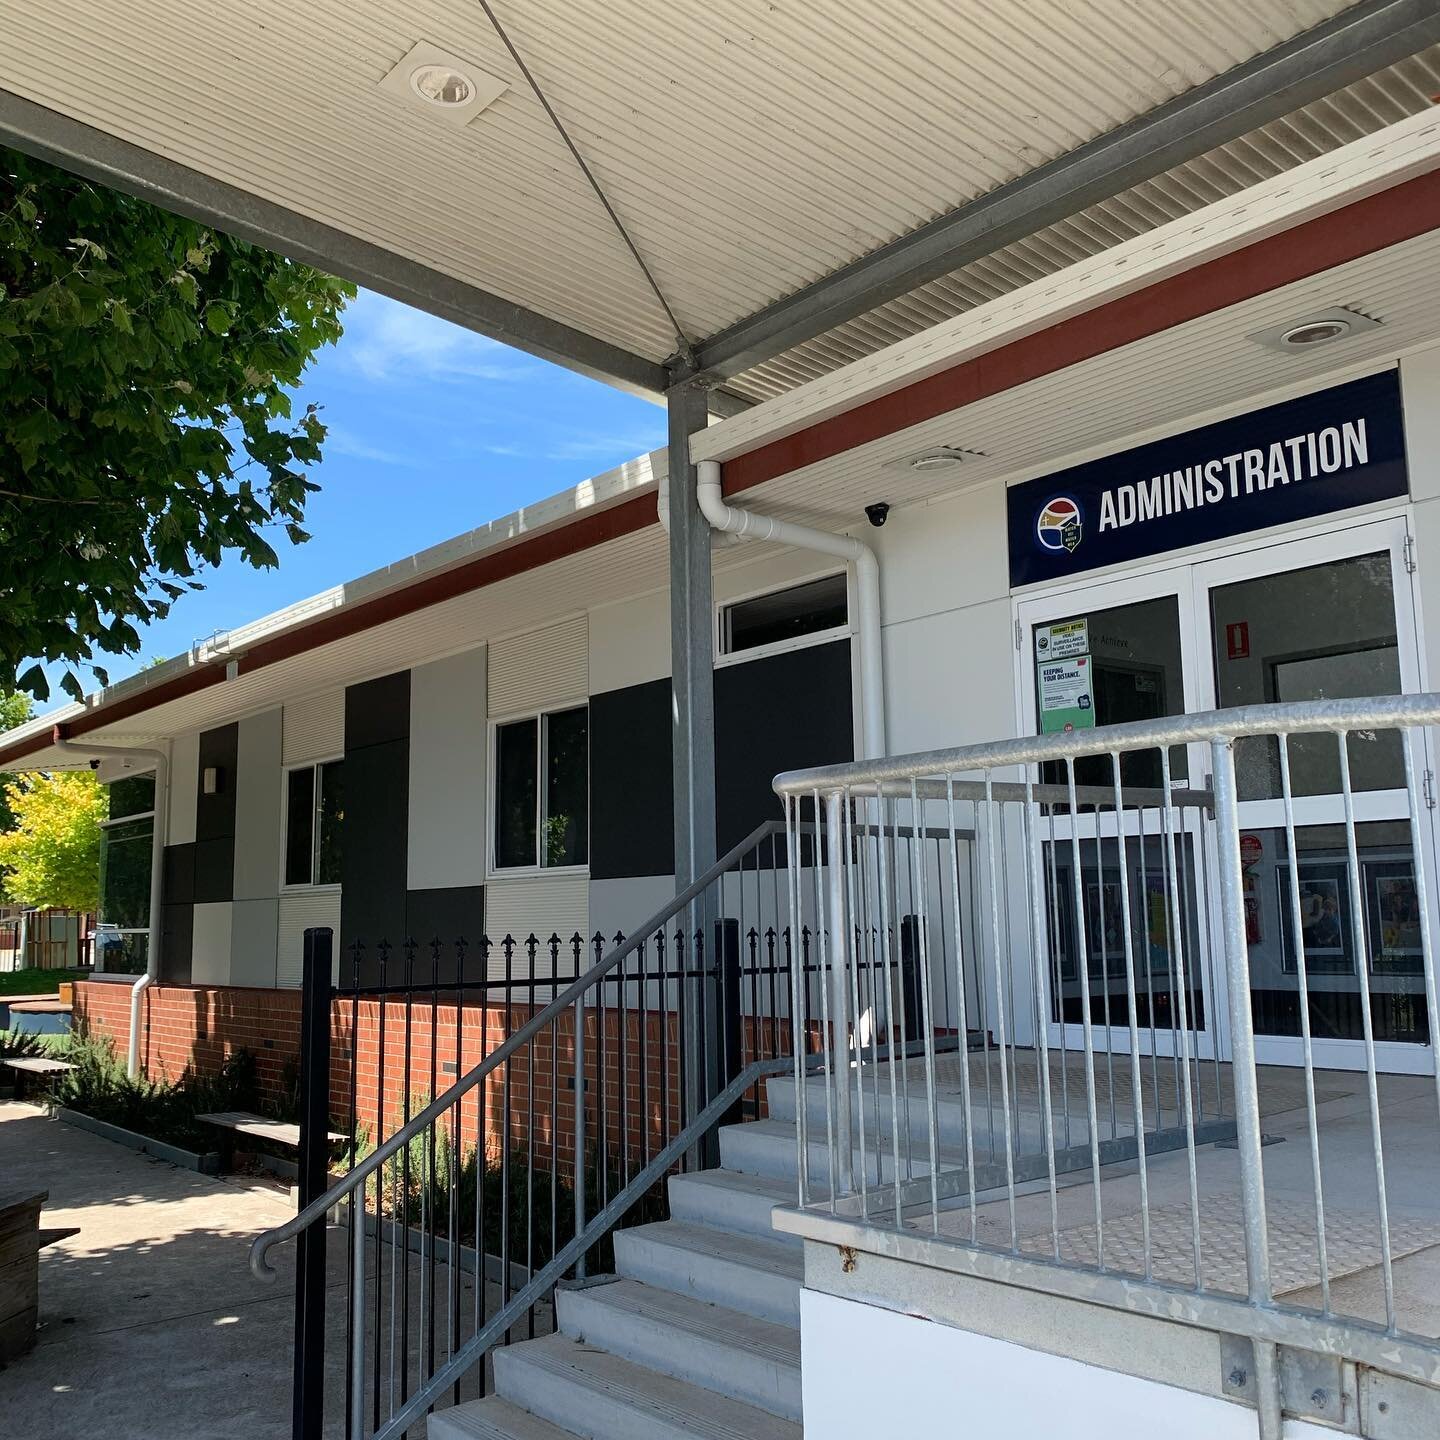 St Marys Primary School, Geelong. ⠀
⠀
A look back at one of our summer jobs for St Marys School, Geelong. ⠀
⠀
■ External wash down. ✔️⠀
⠀
■ Brand new colour scheme to modernise and freshen up. ✔️⠀
⠀
■ Timber repair to rotten &amp; damaged fascias. ✔️